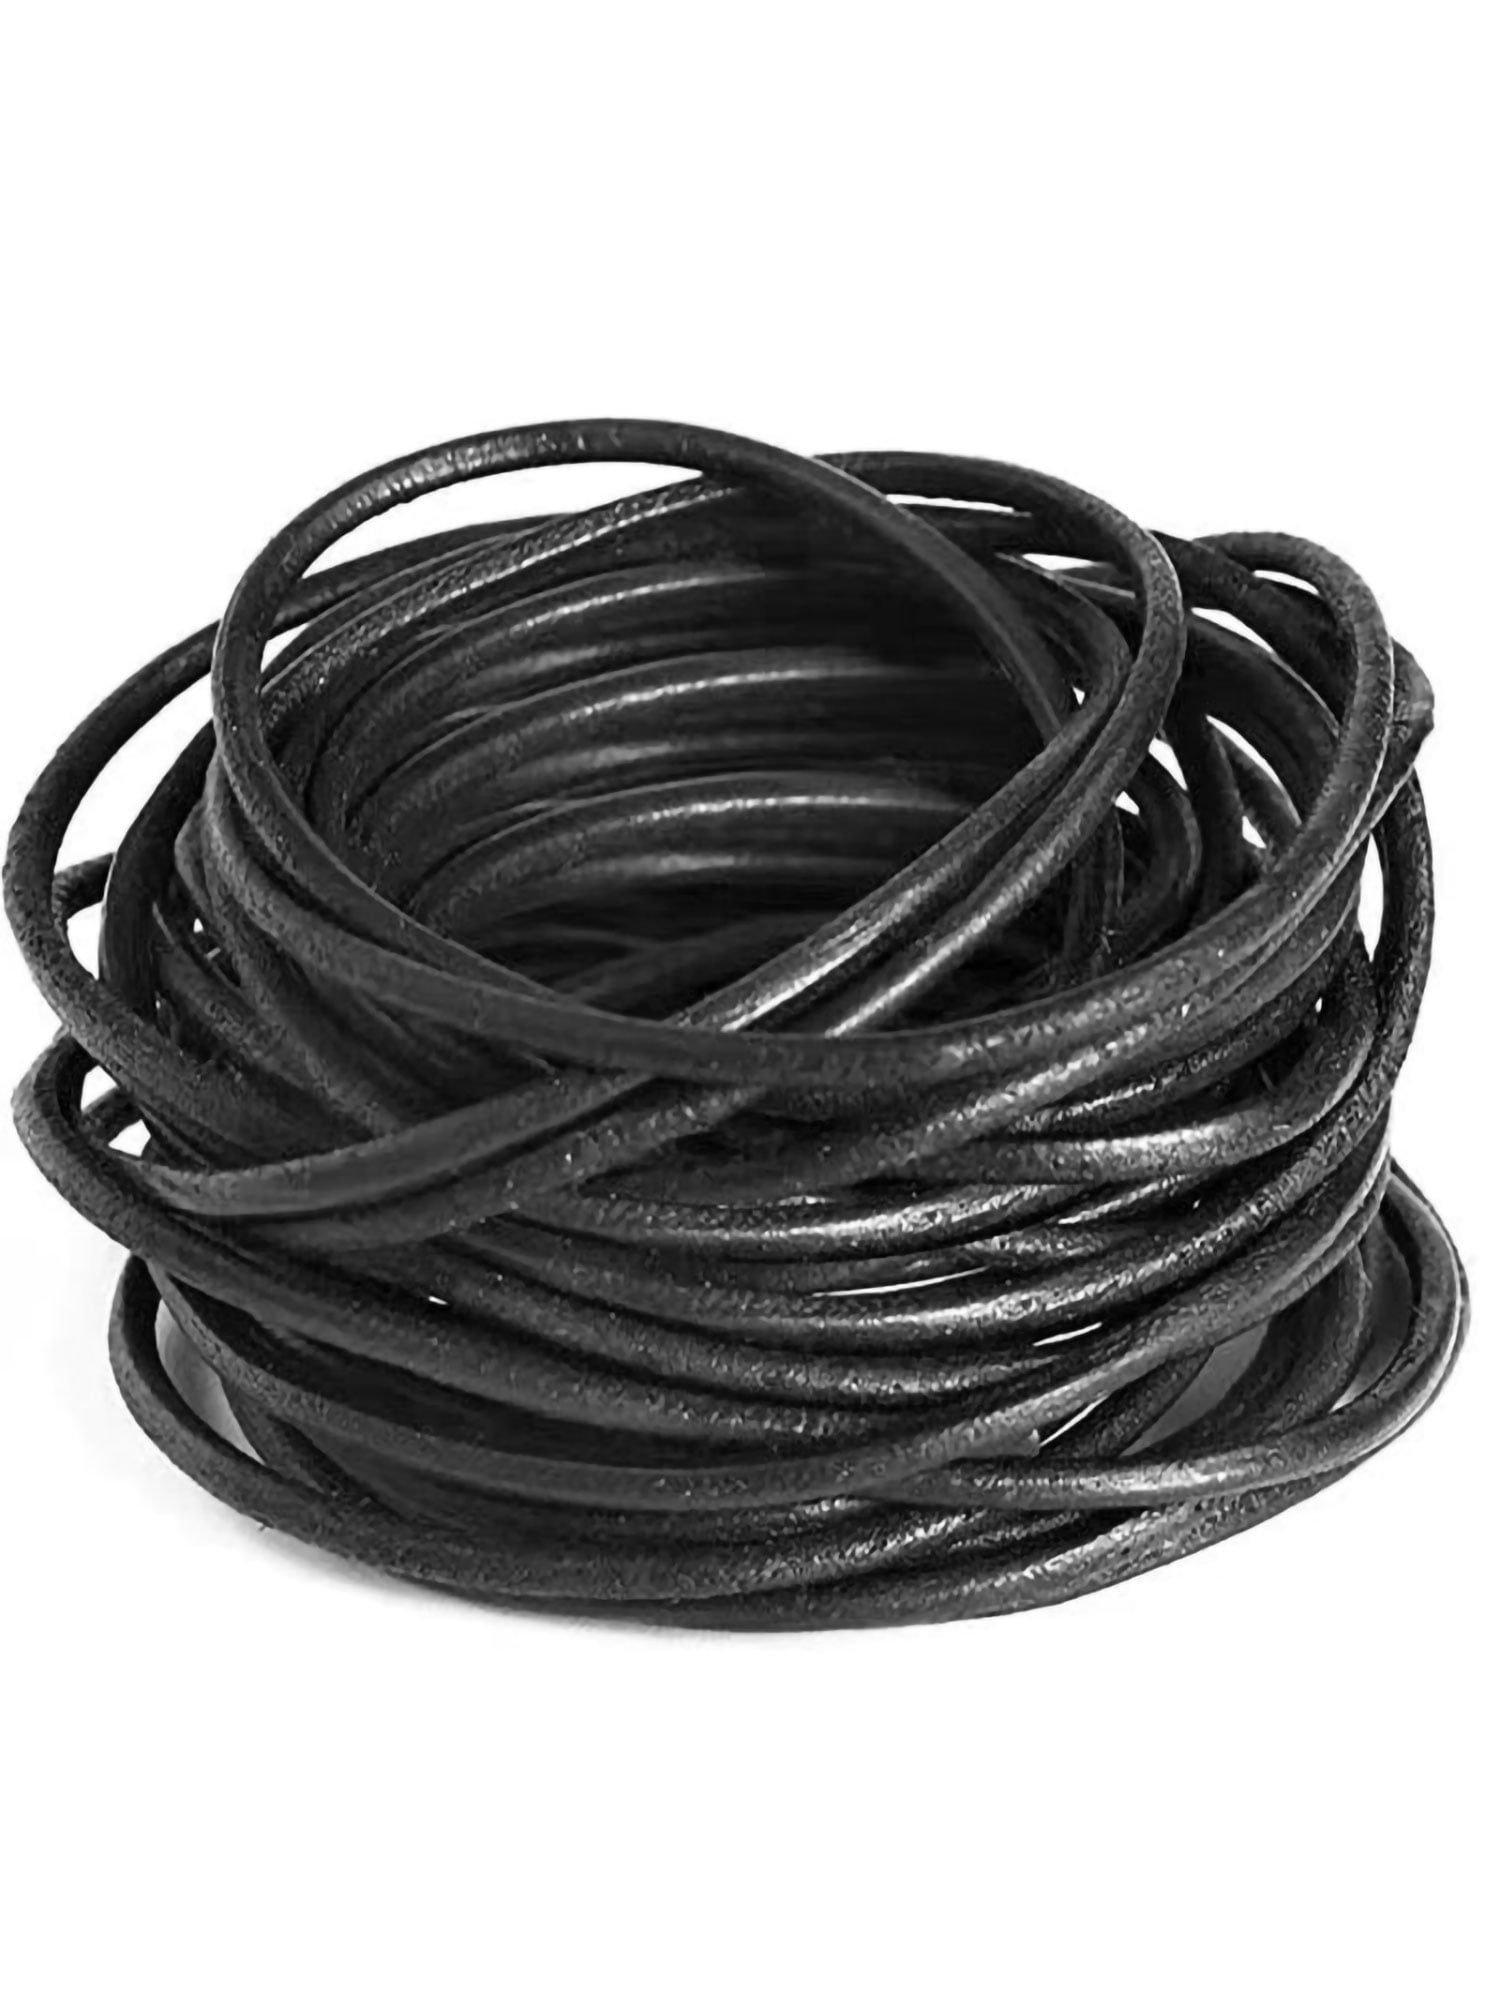 Top Quality Soft GENUINE 4MM Width Flat LEATHER CORD Thong for Necklace/Shoelace 